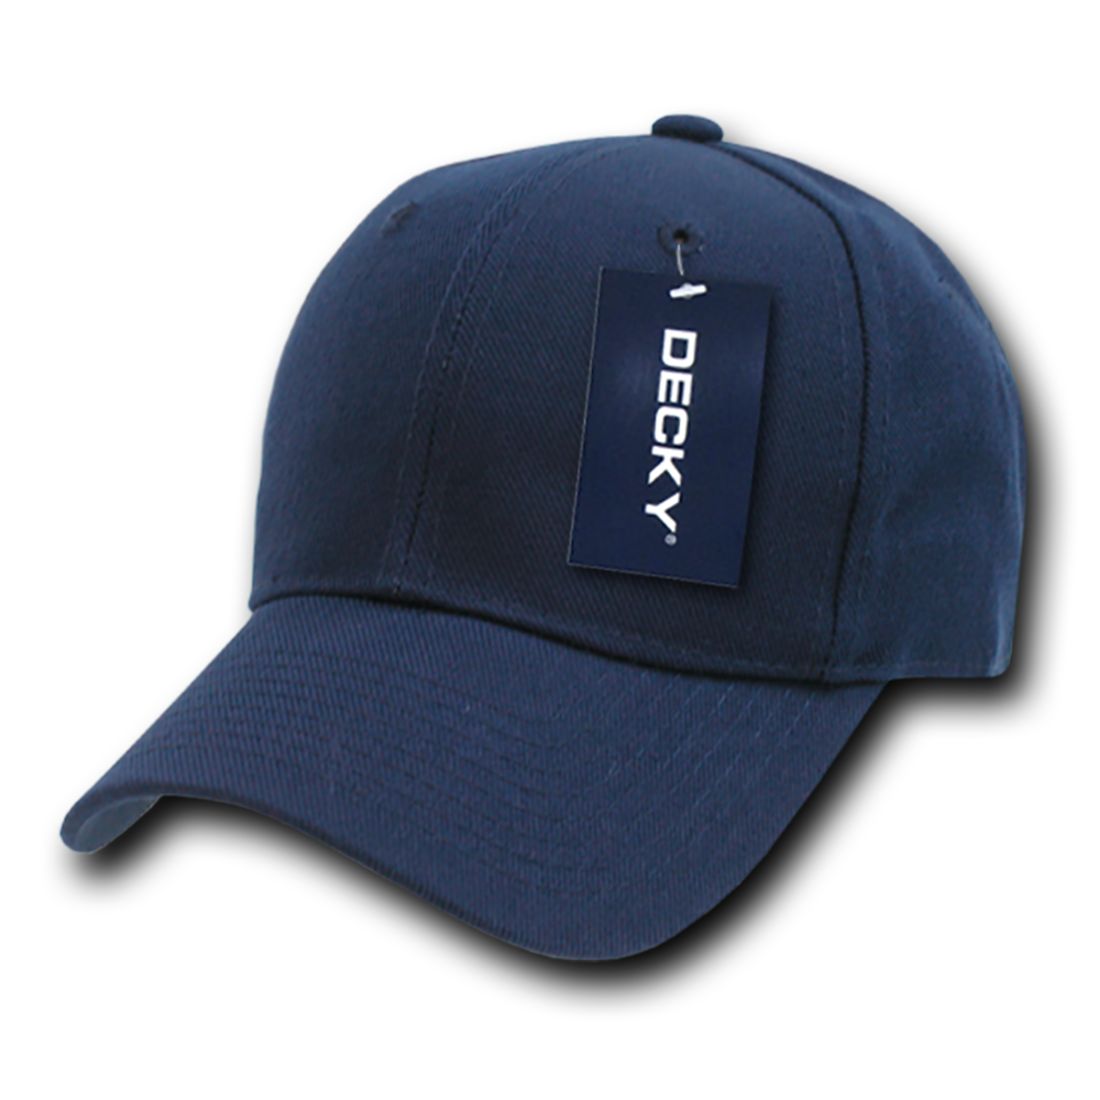 Decky 402 Fitted High Profile Hats 6 Panel Structured Baseball Caps Blank